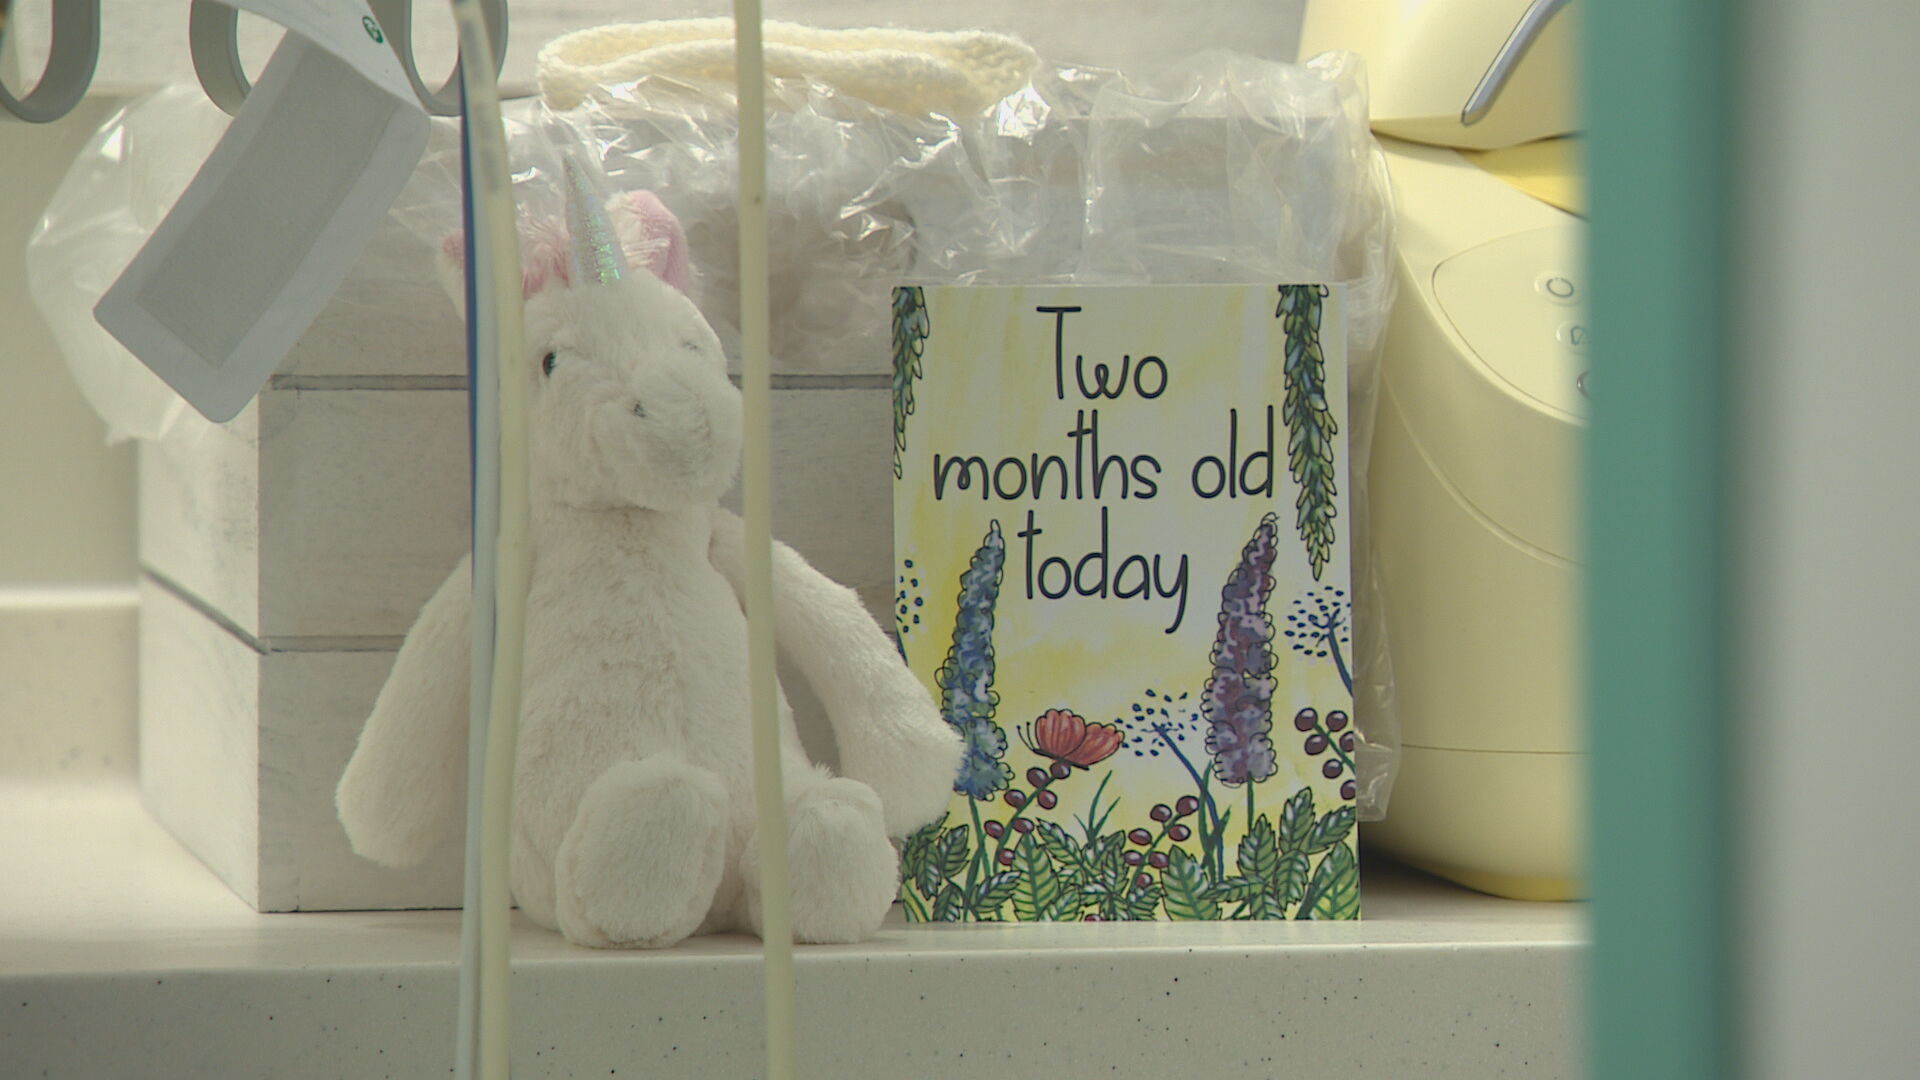 New specialist unit offers families space to grieve the loss of their baby